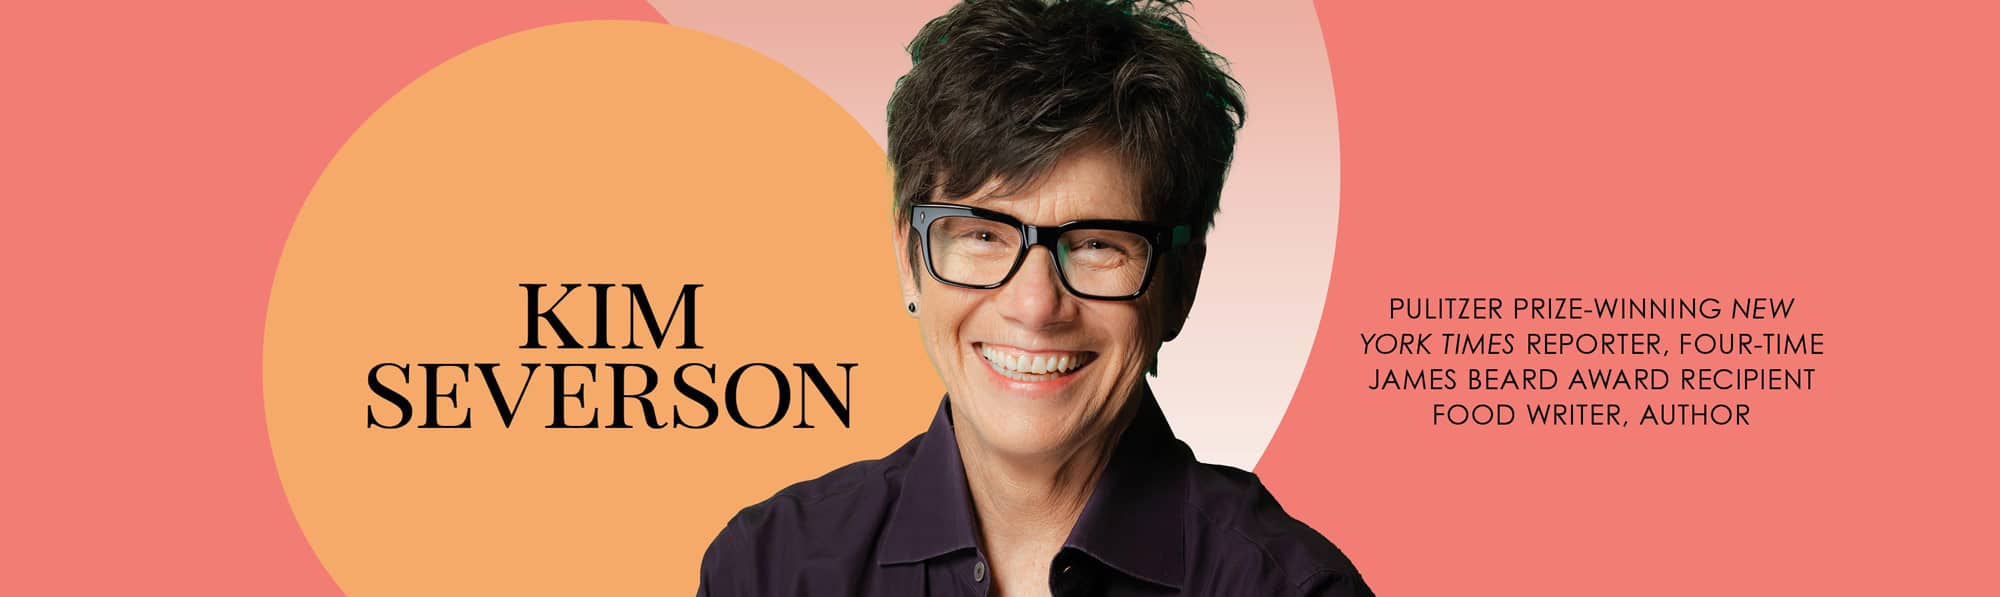 Join Kim Severson at the California Conference for Women this February 29th!